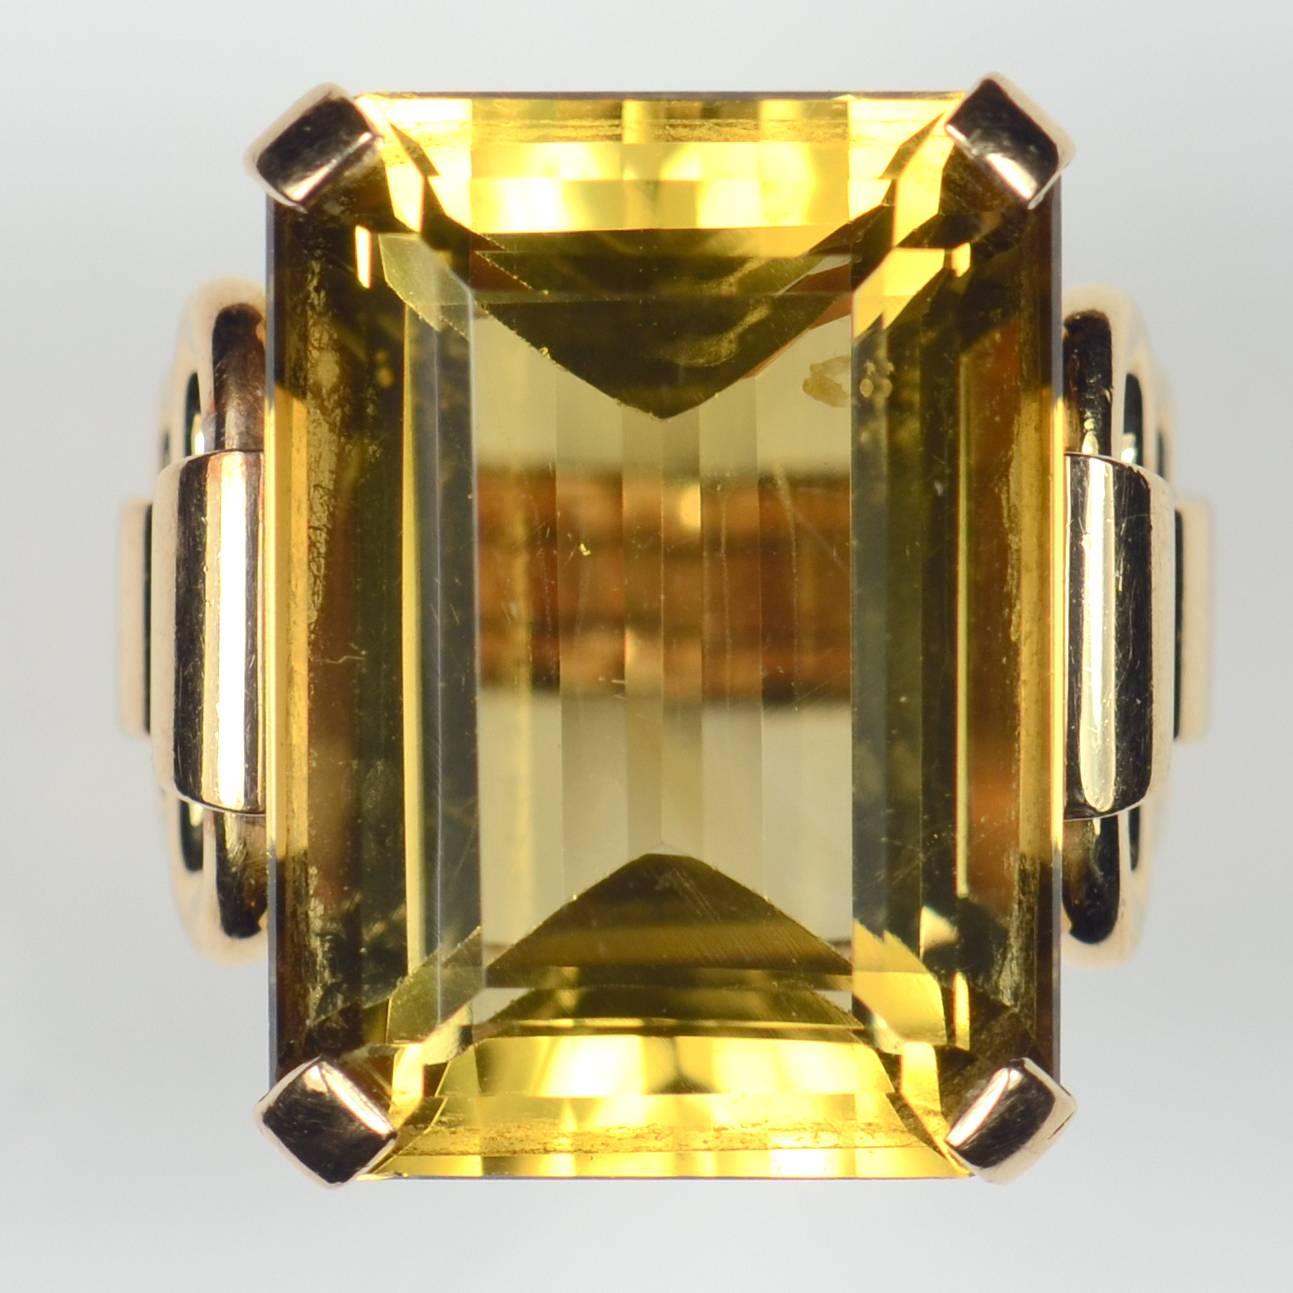 The 1940s were all about big bold cocktail rings and this is a fabulous example of that period.  The large emerald-cut citrine has a mellow honey colour and weighs approximately 27 carats with excellent clarity.

The citrine is set to an 18 carat